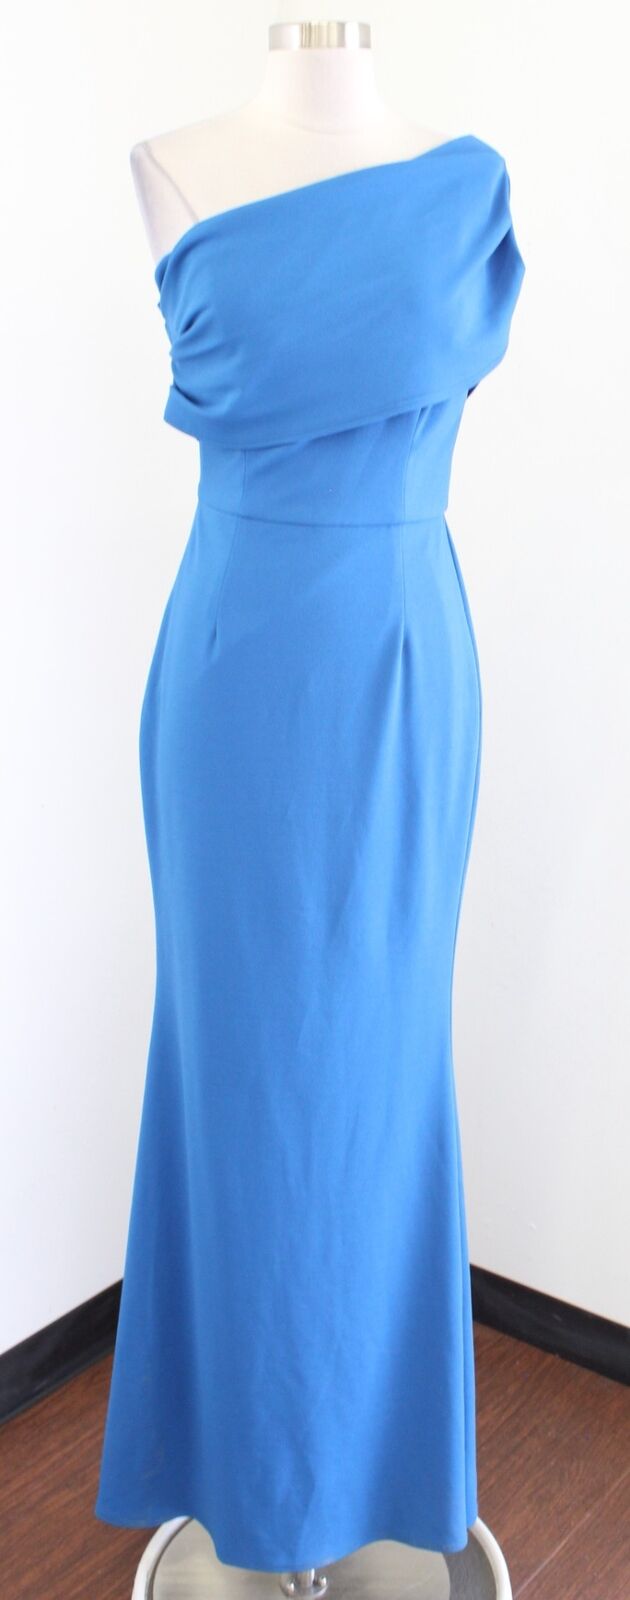 Katie May Bhldn Layla Crepe One Shoulder Formal Dress Gown Size 6 Lagoon Blue